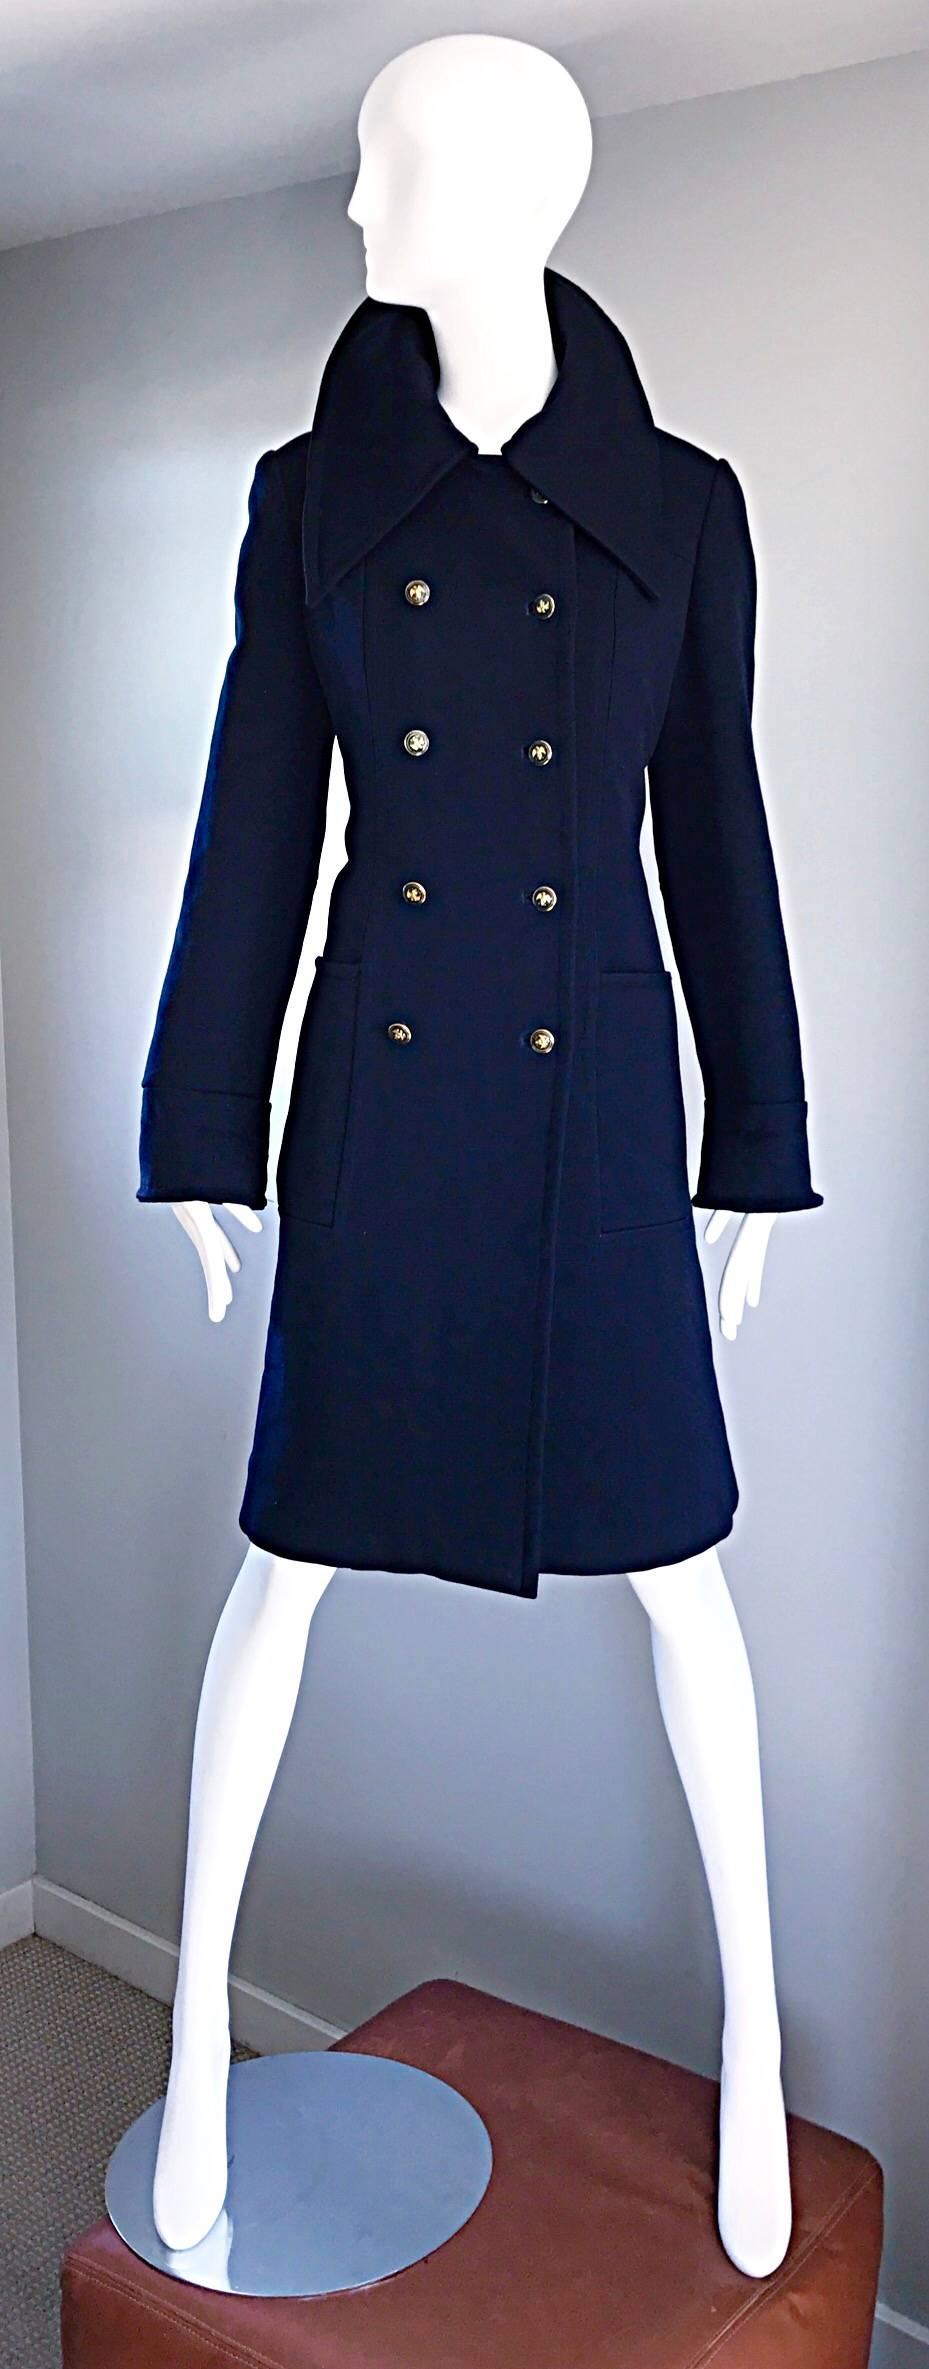 Incredibly chic, stylish and timeless vintage 70s LUBA for SAKS FIFTH AVENUE navy blue long wool peacoat! Flattering tailored fit. Military inspired double breasted style. Gold / Brass novelty buttons down the bodice, and at the back self belt.